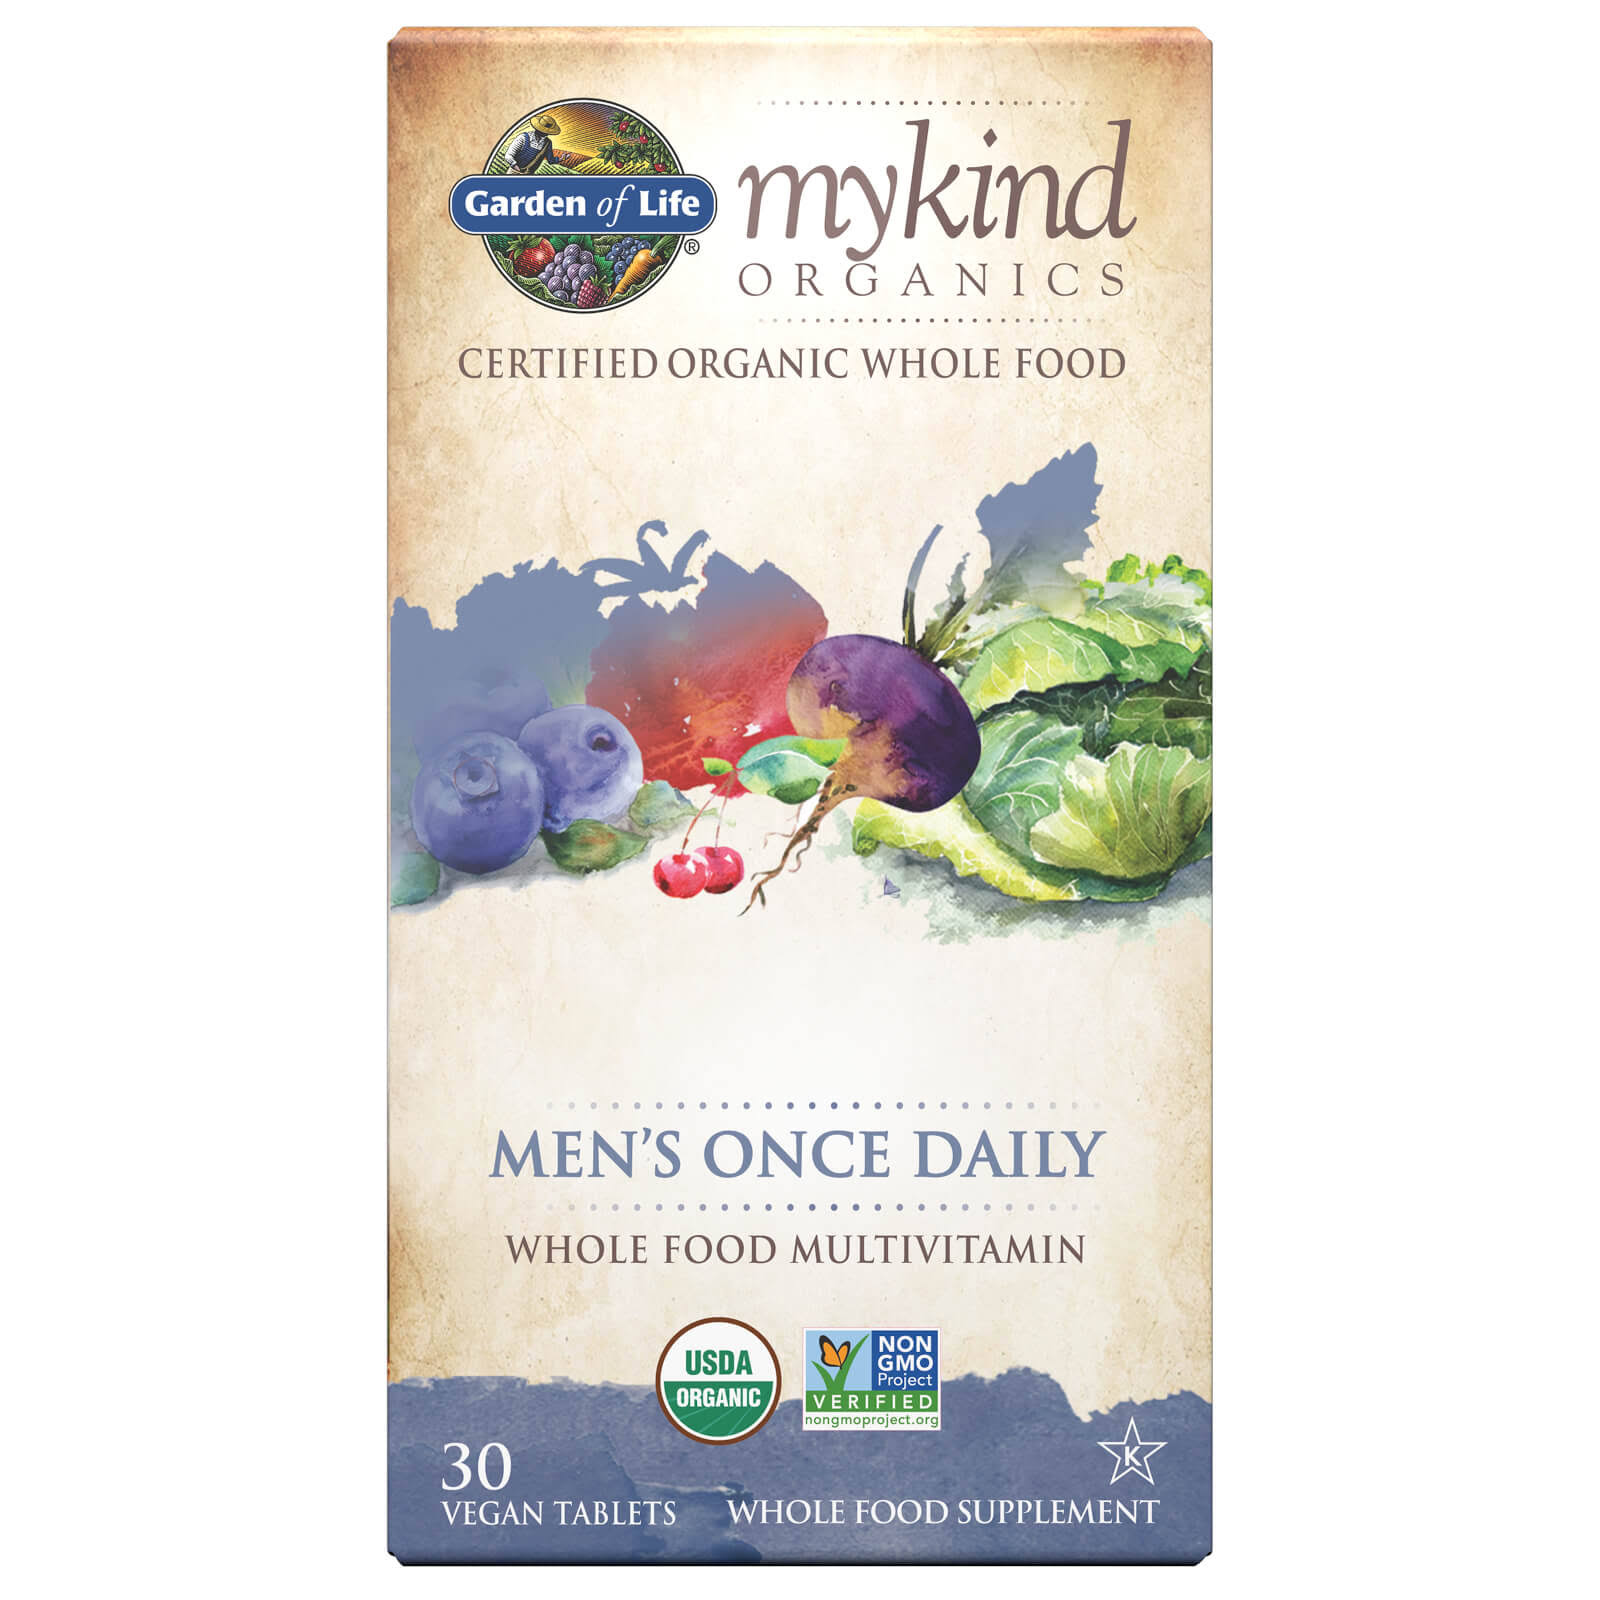 Garden of Life - mykind Organics Men's Once Daily 30 Tablets